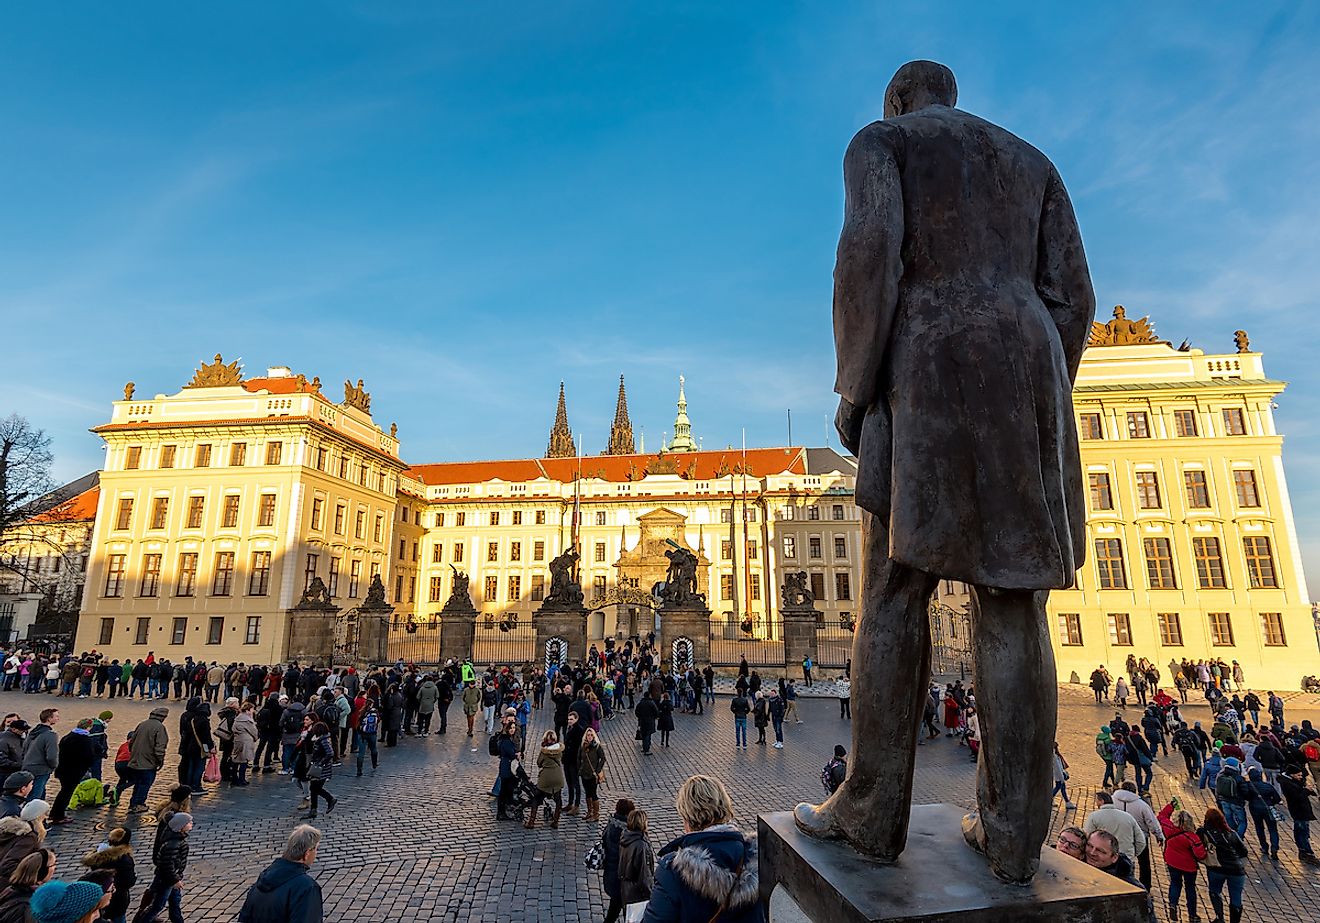 Statue of Tomas Garrigue Masaryk, the first President of Czechoslovakia at Hradcany Square, Prague Castle. Image credit: Kojin/Shutterstock.com